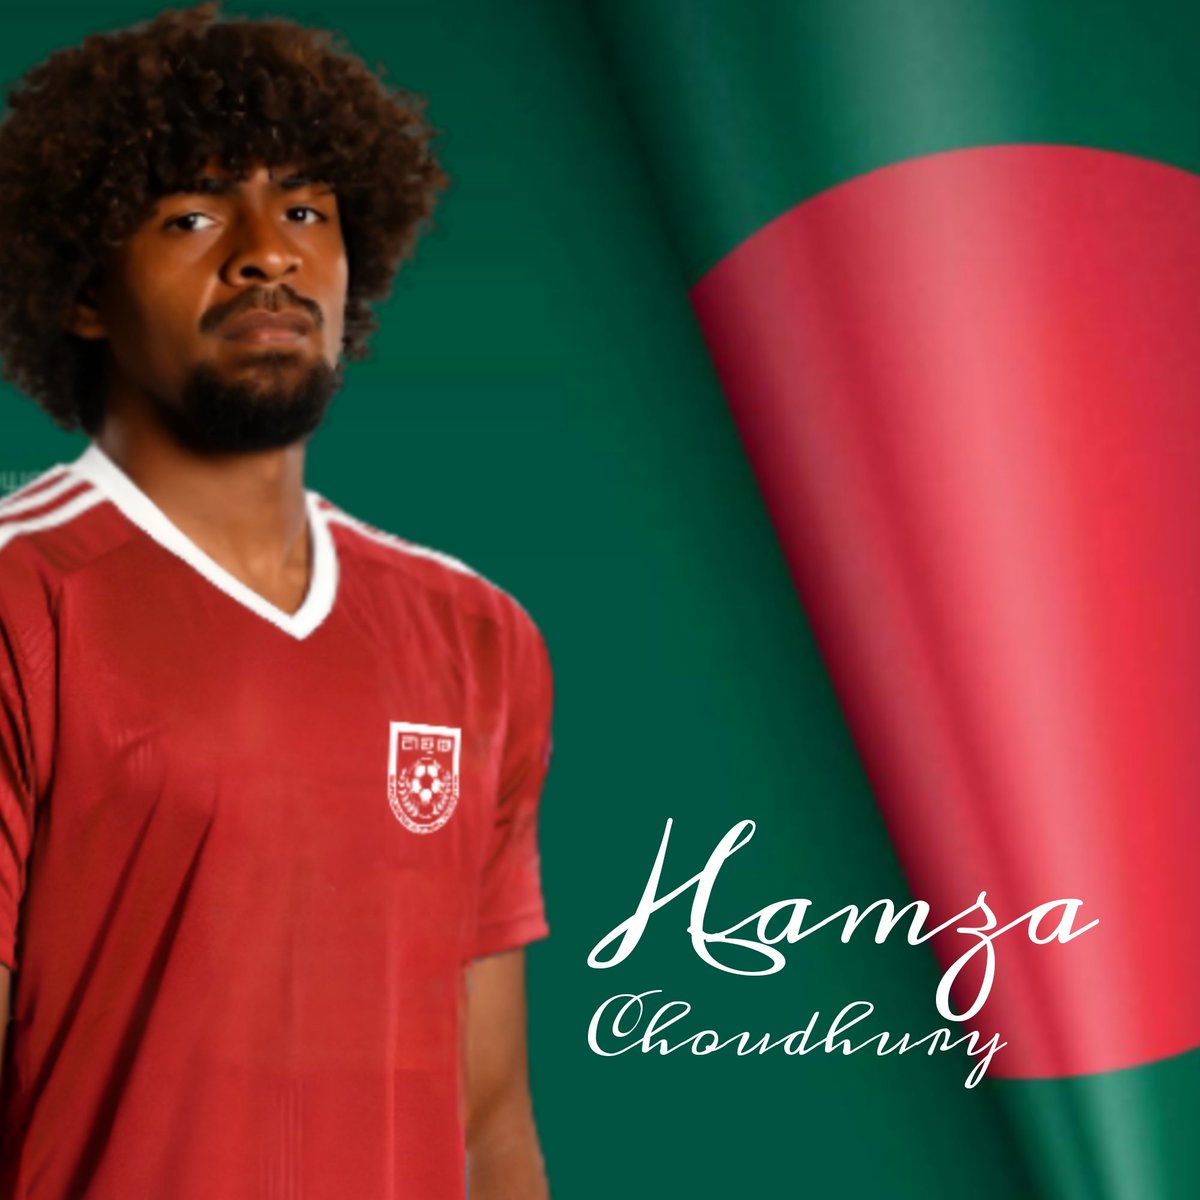 🚨 Hamza Choudhury Updates : 🇧🇩 Birth Registration Certificate : Done 🇧🇩 Passport : On Process ( Will be completed before September per sources ) 🏴󠁧󠁢󠁥󠁮󠁧󠁿 FA Clearance : Pending ⚽ FIFA Clearance : After 🏴󠁧󠁢󠁥󠁮󠁧󠁿 FA Clearance ( Best hope for Hamza is in September Window )